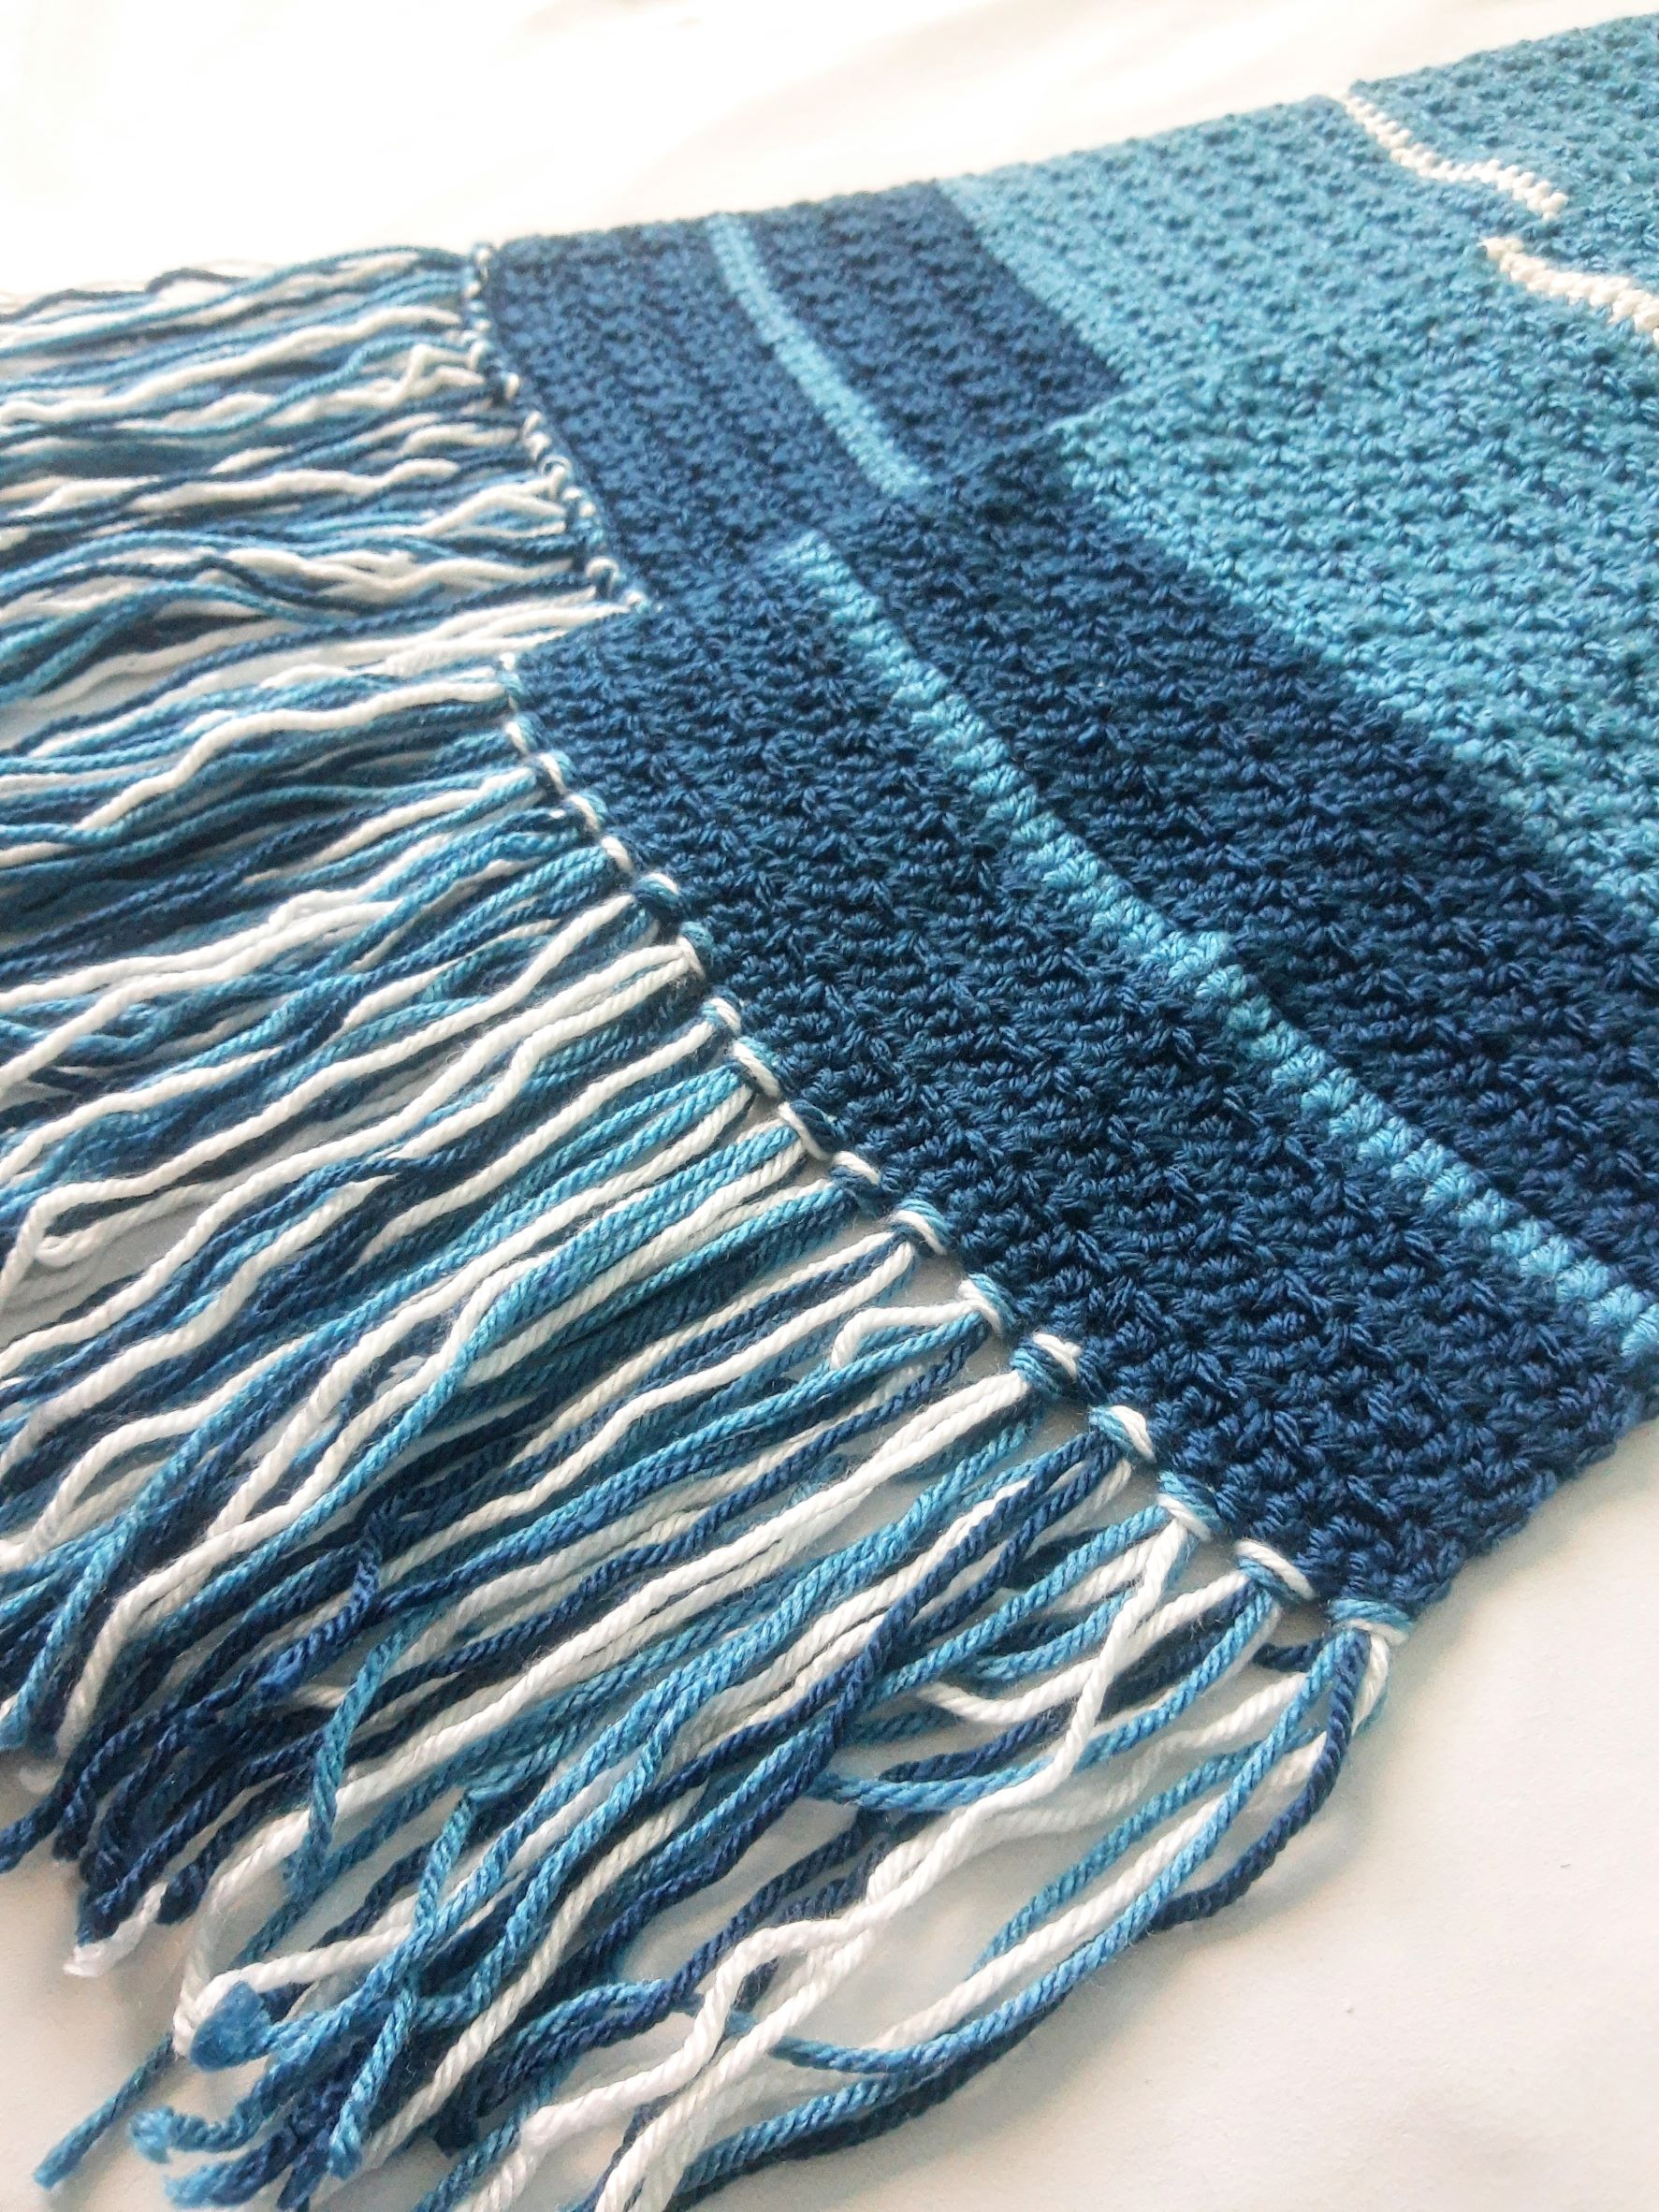 Crochet Scarves and Shawls Archives